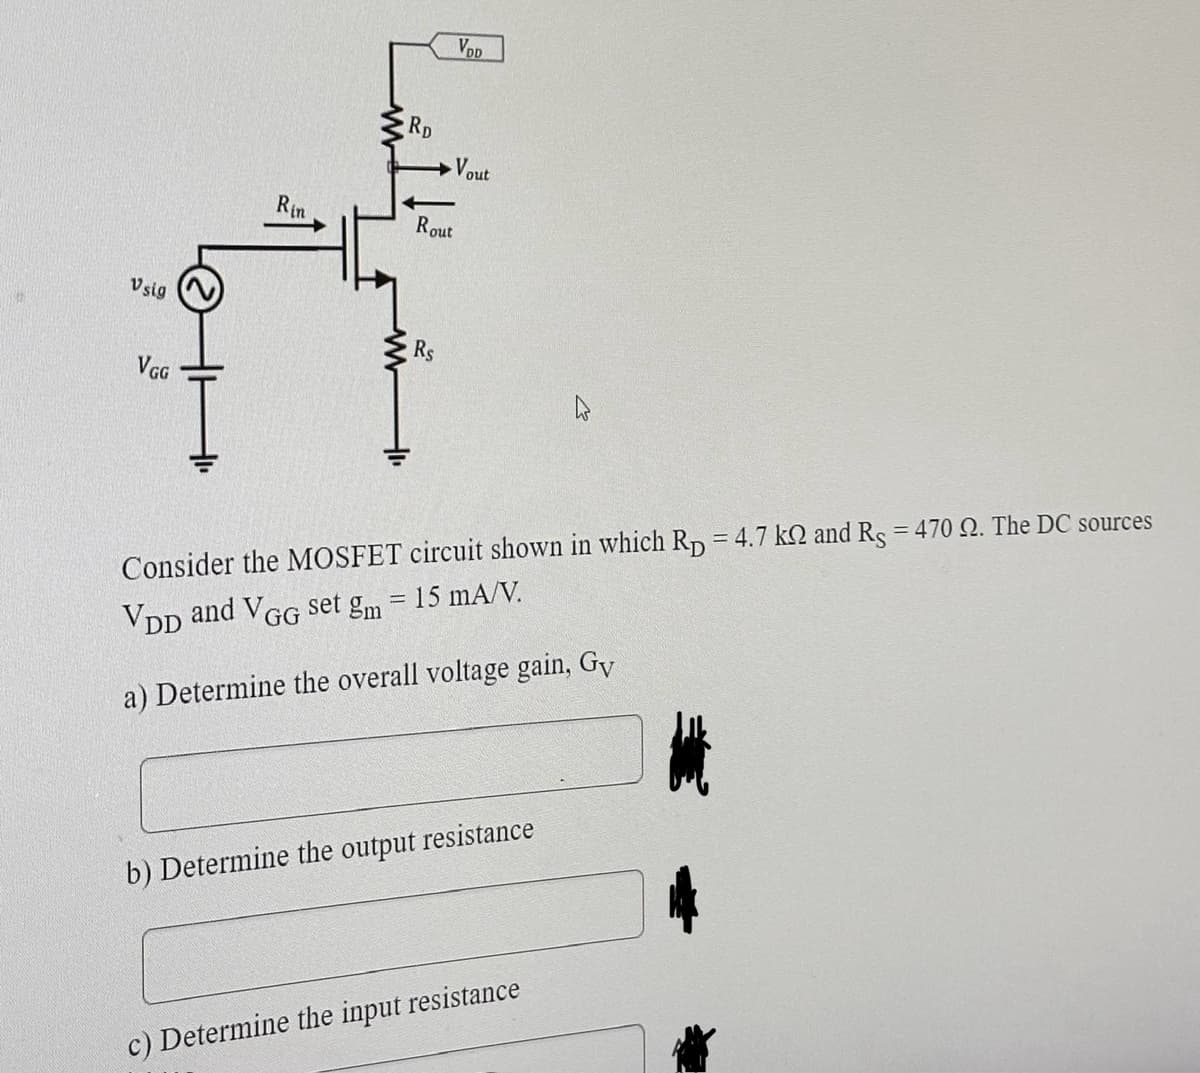 Vsig
VGG
Rin
RD
Rout
Rs
VDD
Vout
Consider the MOSFET circuit shown in which Rp = 4.7 k and Rs = 470 2. The DC sources
VDD and VGG set gm = 15 mA/V.
a) Determine the overall voltage gain, Gy
b) Determine the output resistance
c) Determine the input resistance